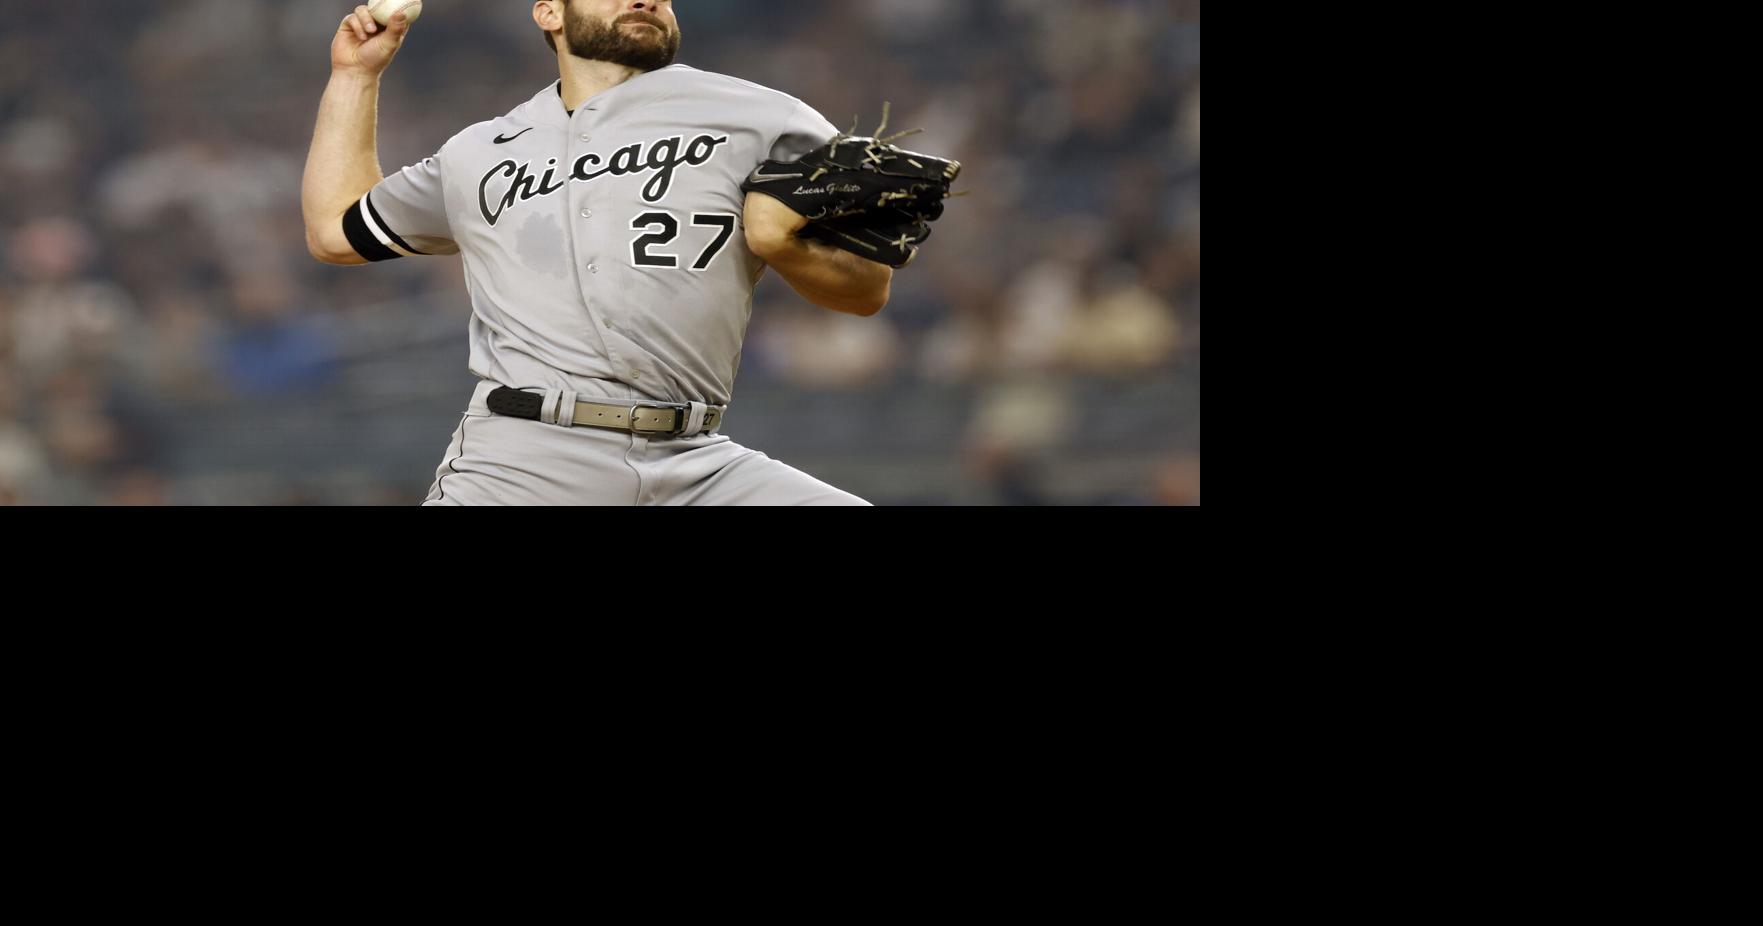 Chicago White Sox Rumors Dodgers interested in Lucas Giolito